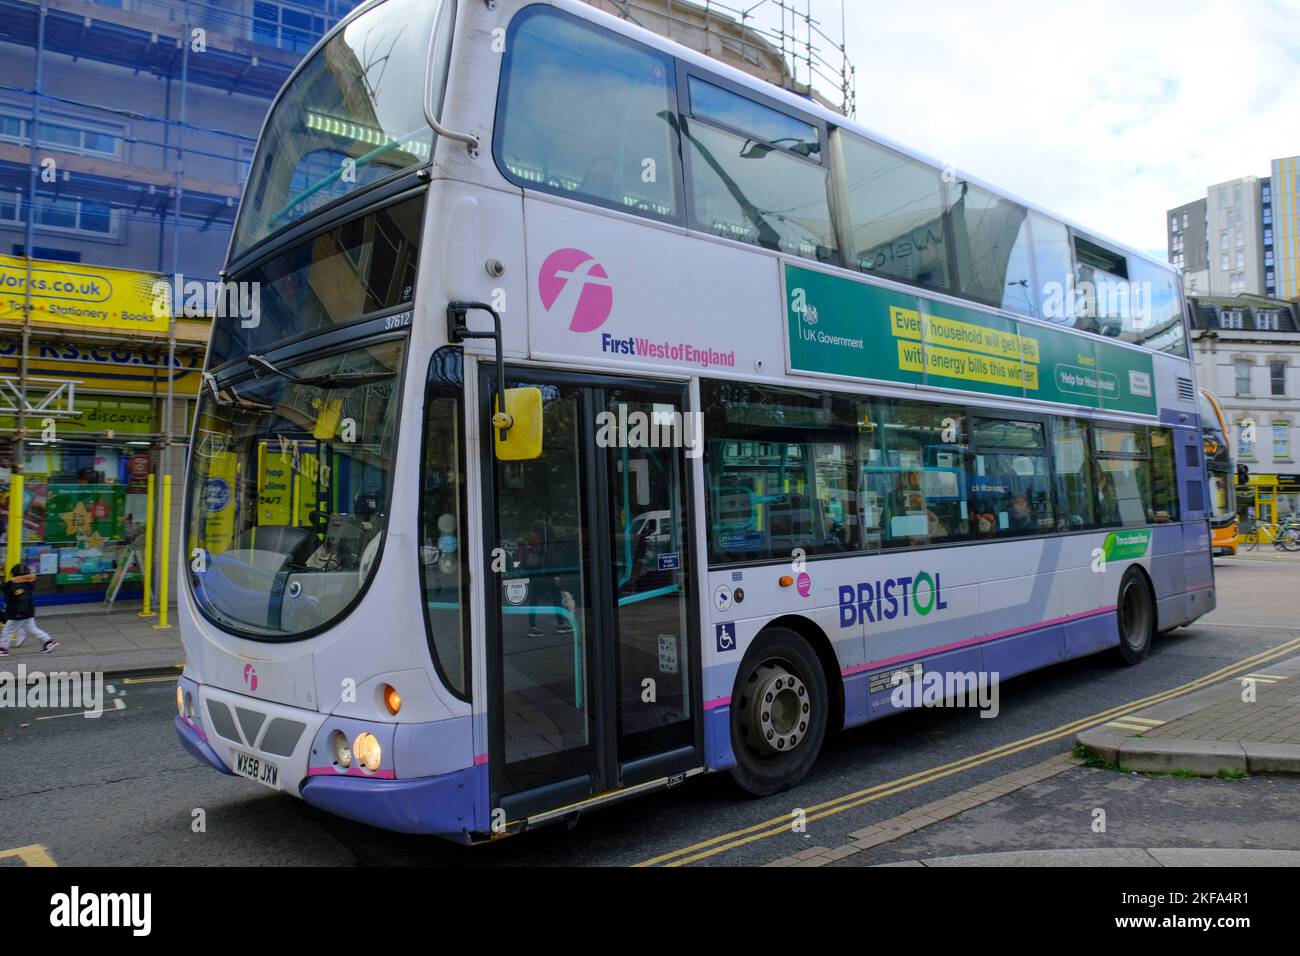 Bristol, UK. 17th Nov, 2022. The Bristol Clean Air Zone will be implemented on the 28th Nov, just as First Bus, a major bus operator in Bristol announces it is reducing a significant number of journeys due to a driver shortage. The Clean Air Zone or CAZ will limit the number of polluting vehicles entering the city, forcing people to use public transport. First Bus hopes that by giving advance notice it will allow customers to make alternative plans. Credit: JMF News/Alamy Live News Stock Photo